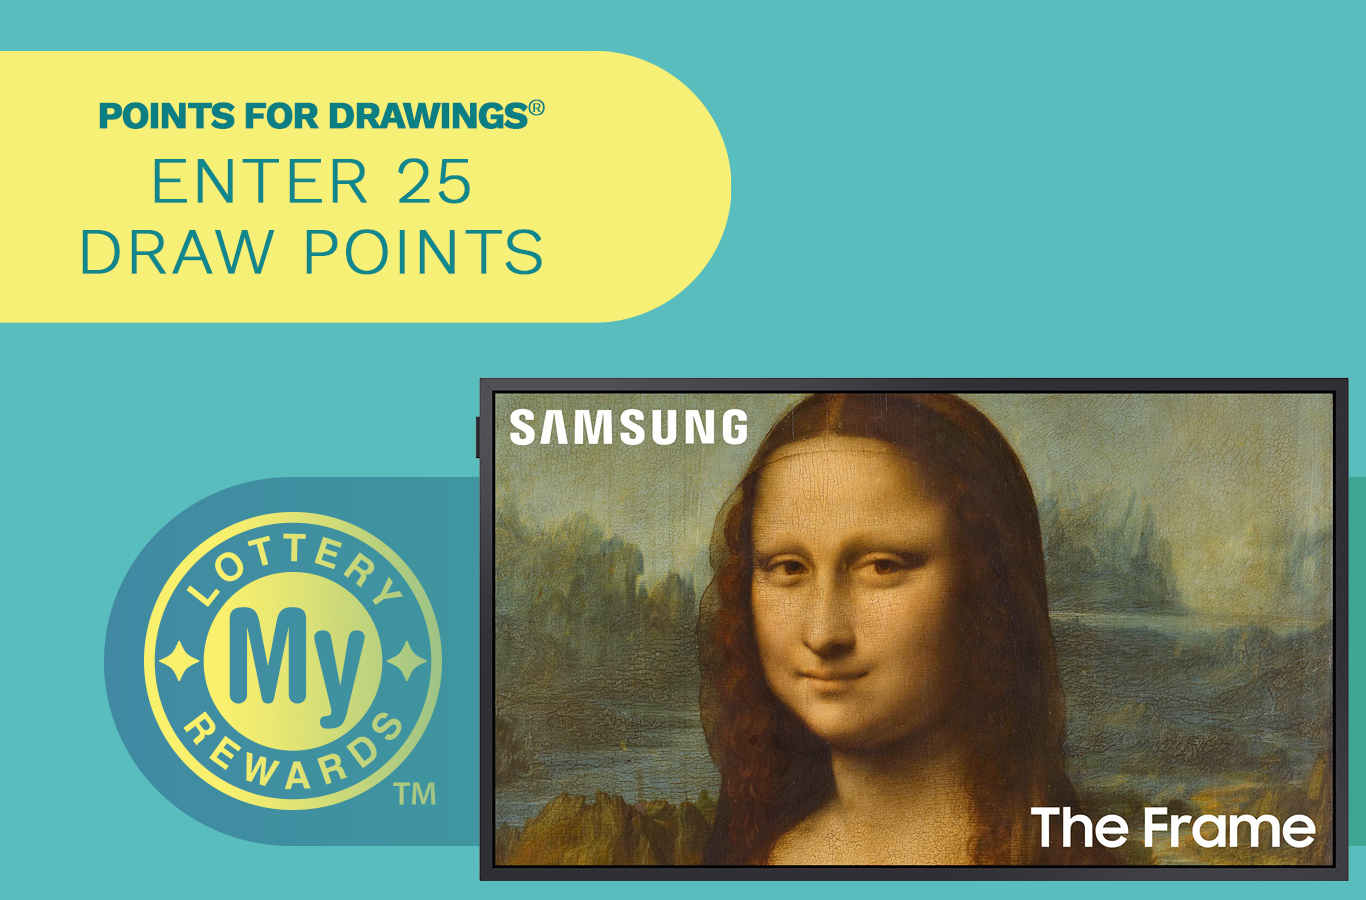 Here's your chance to win a Samsung® The Frame™ TV Bundle! Enter by Monday, April 3rd.